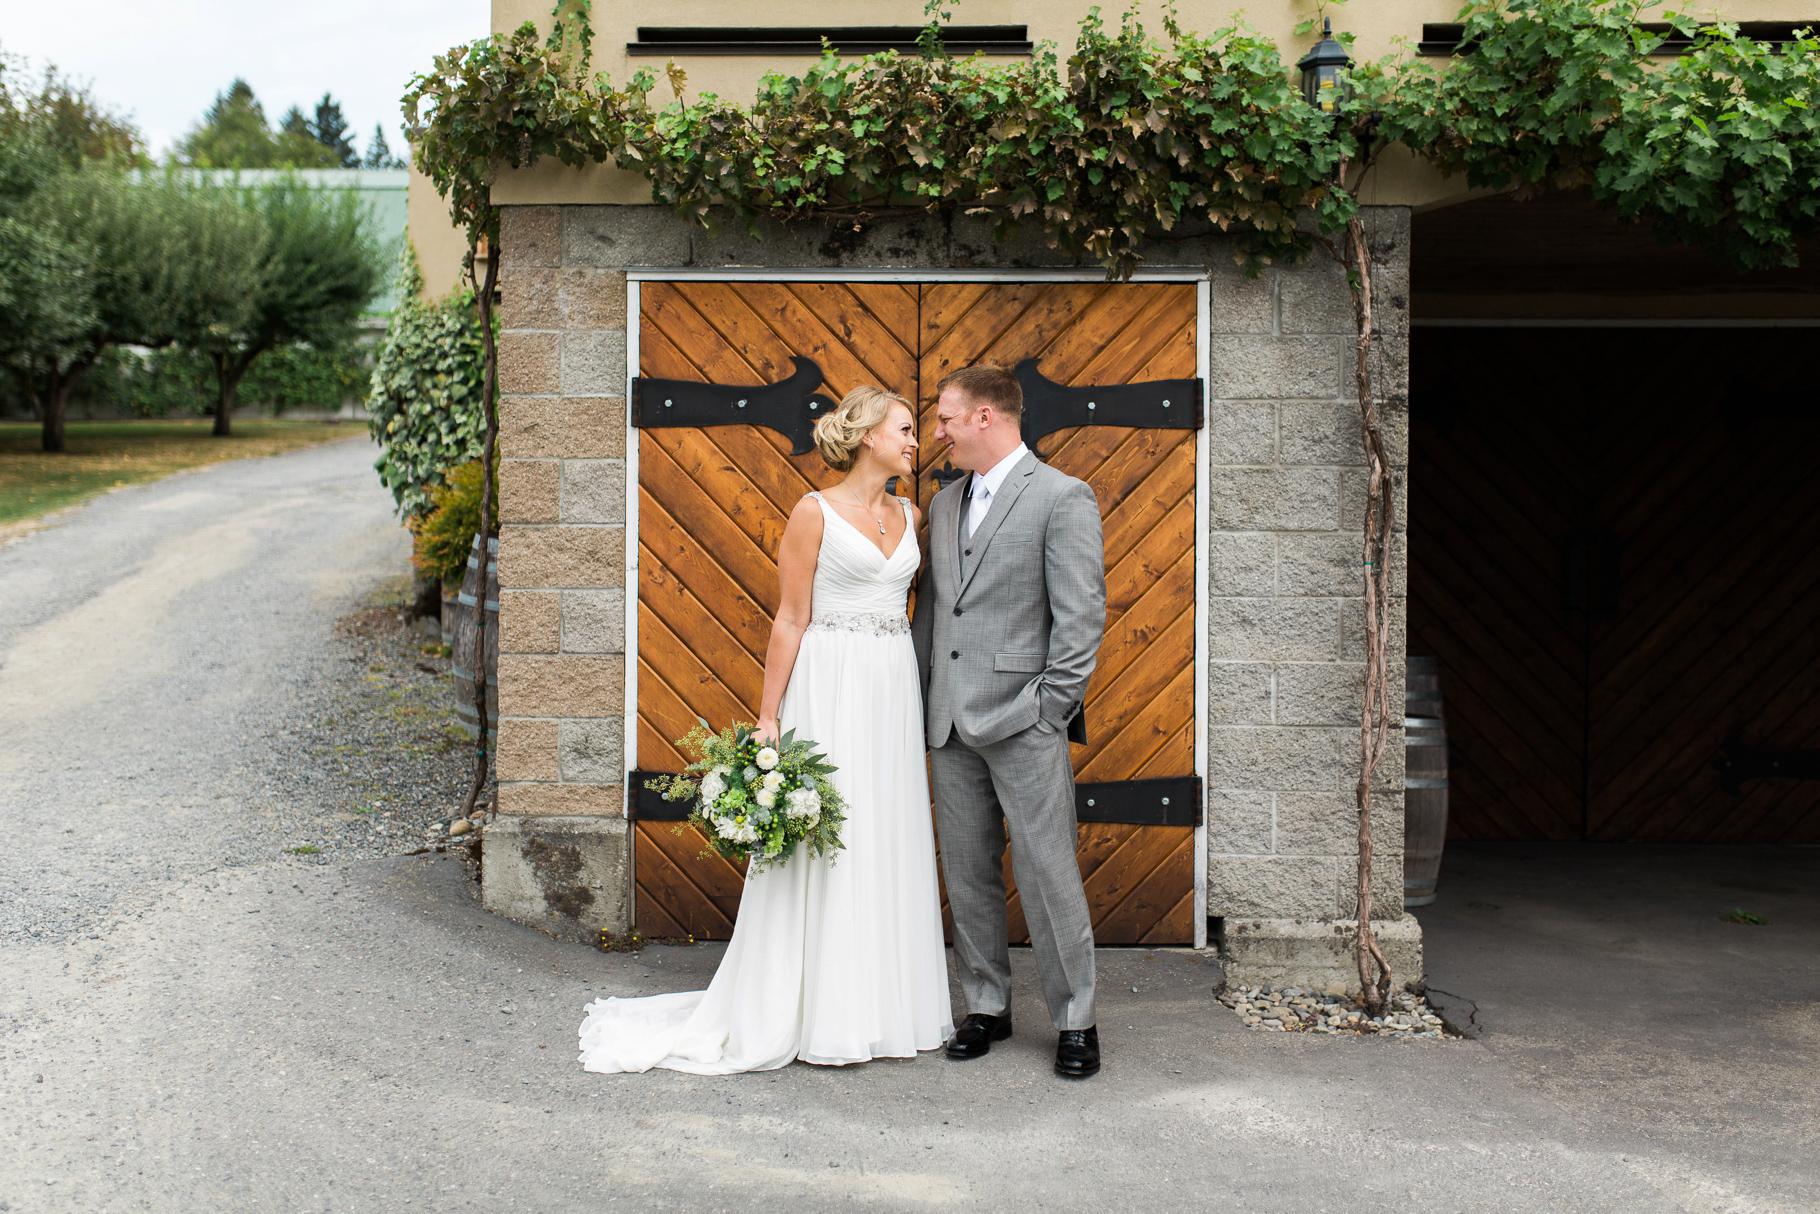 13-Delille-Cellars-Chateau-First-Look-Bride-Groom-Wedding-Photography-by-Betty-Elaine-Woodinville-Winery-Seattle-Photographer